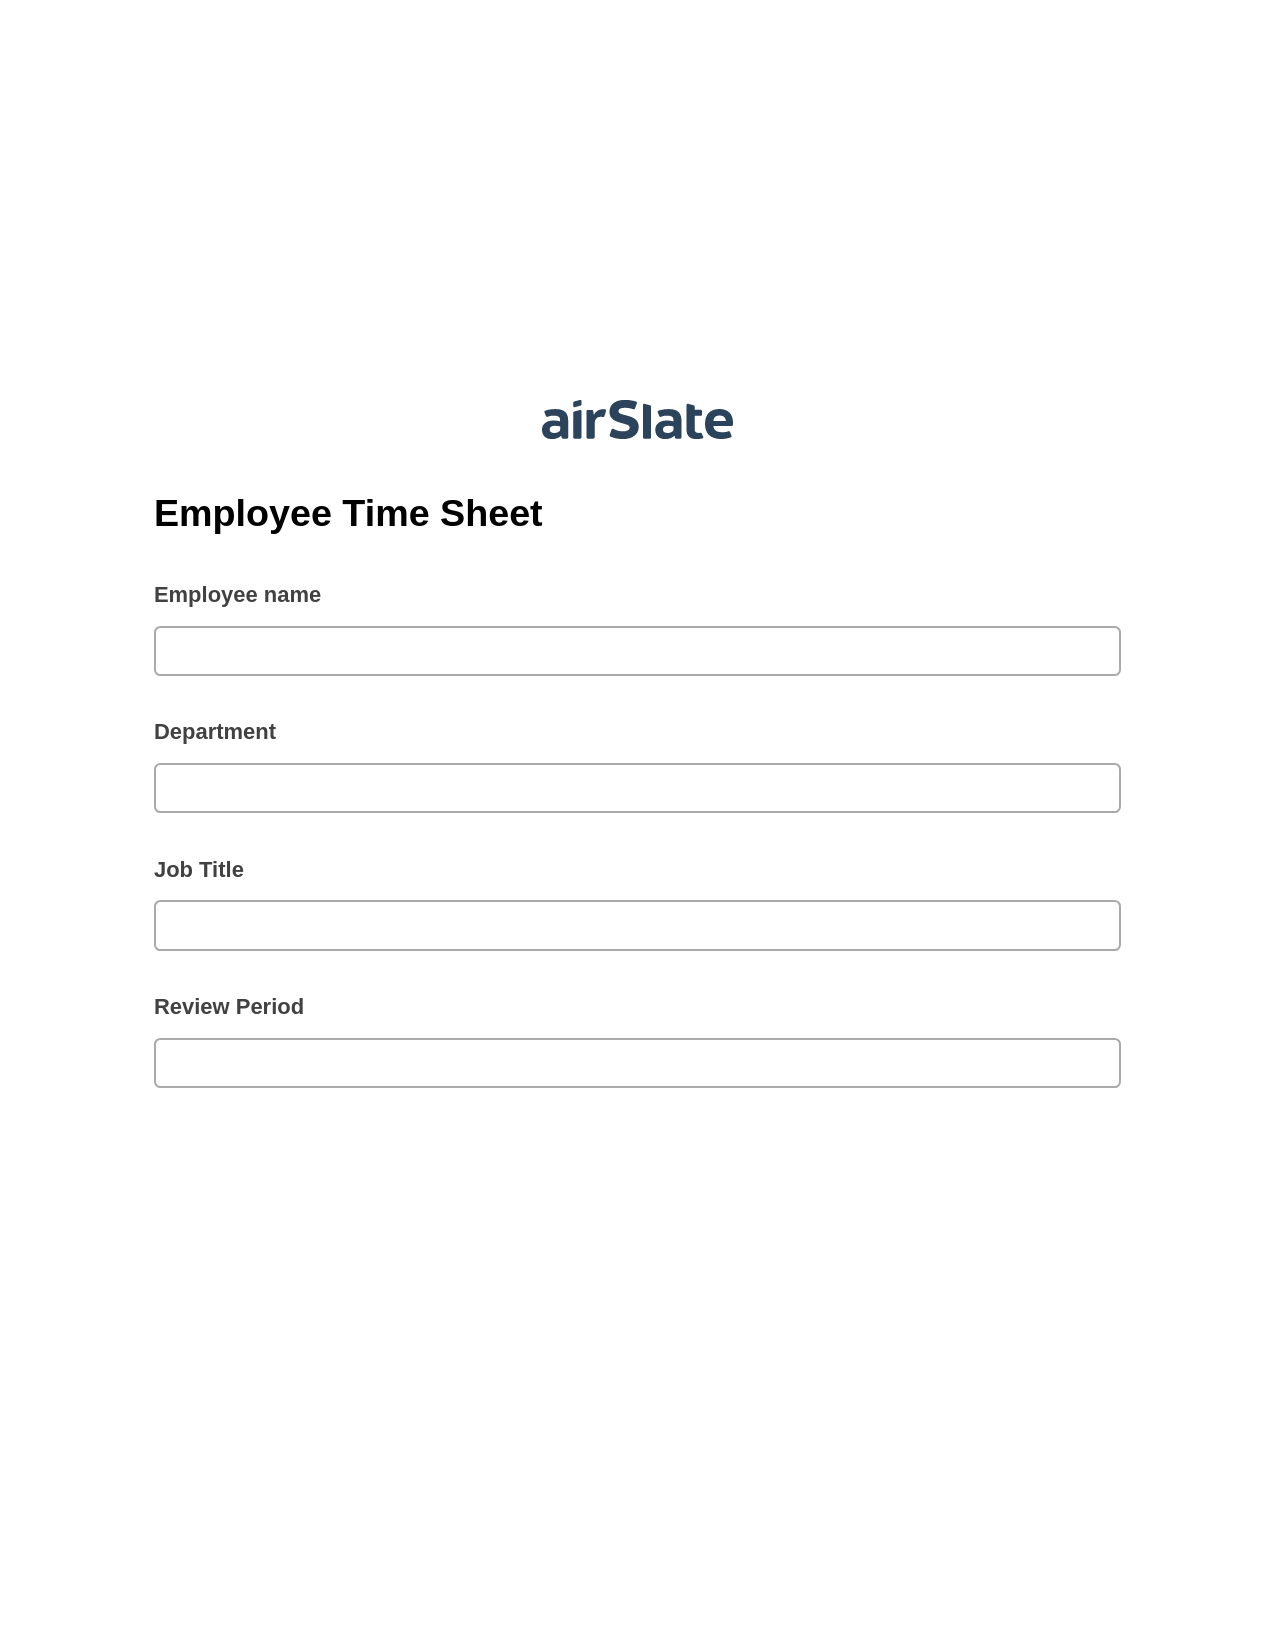 Employee Time Sheet Pre-fill Dropdowns from Airtable, Update Audit Trail Bot, Email Notification Postfinish Bot